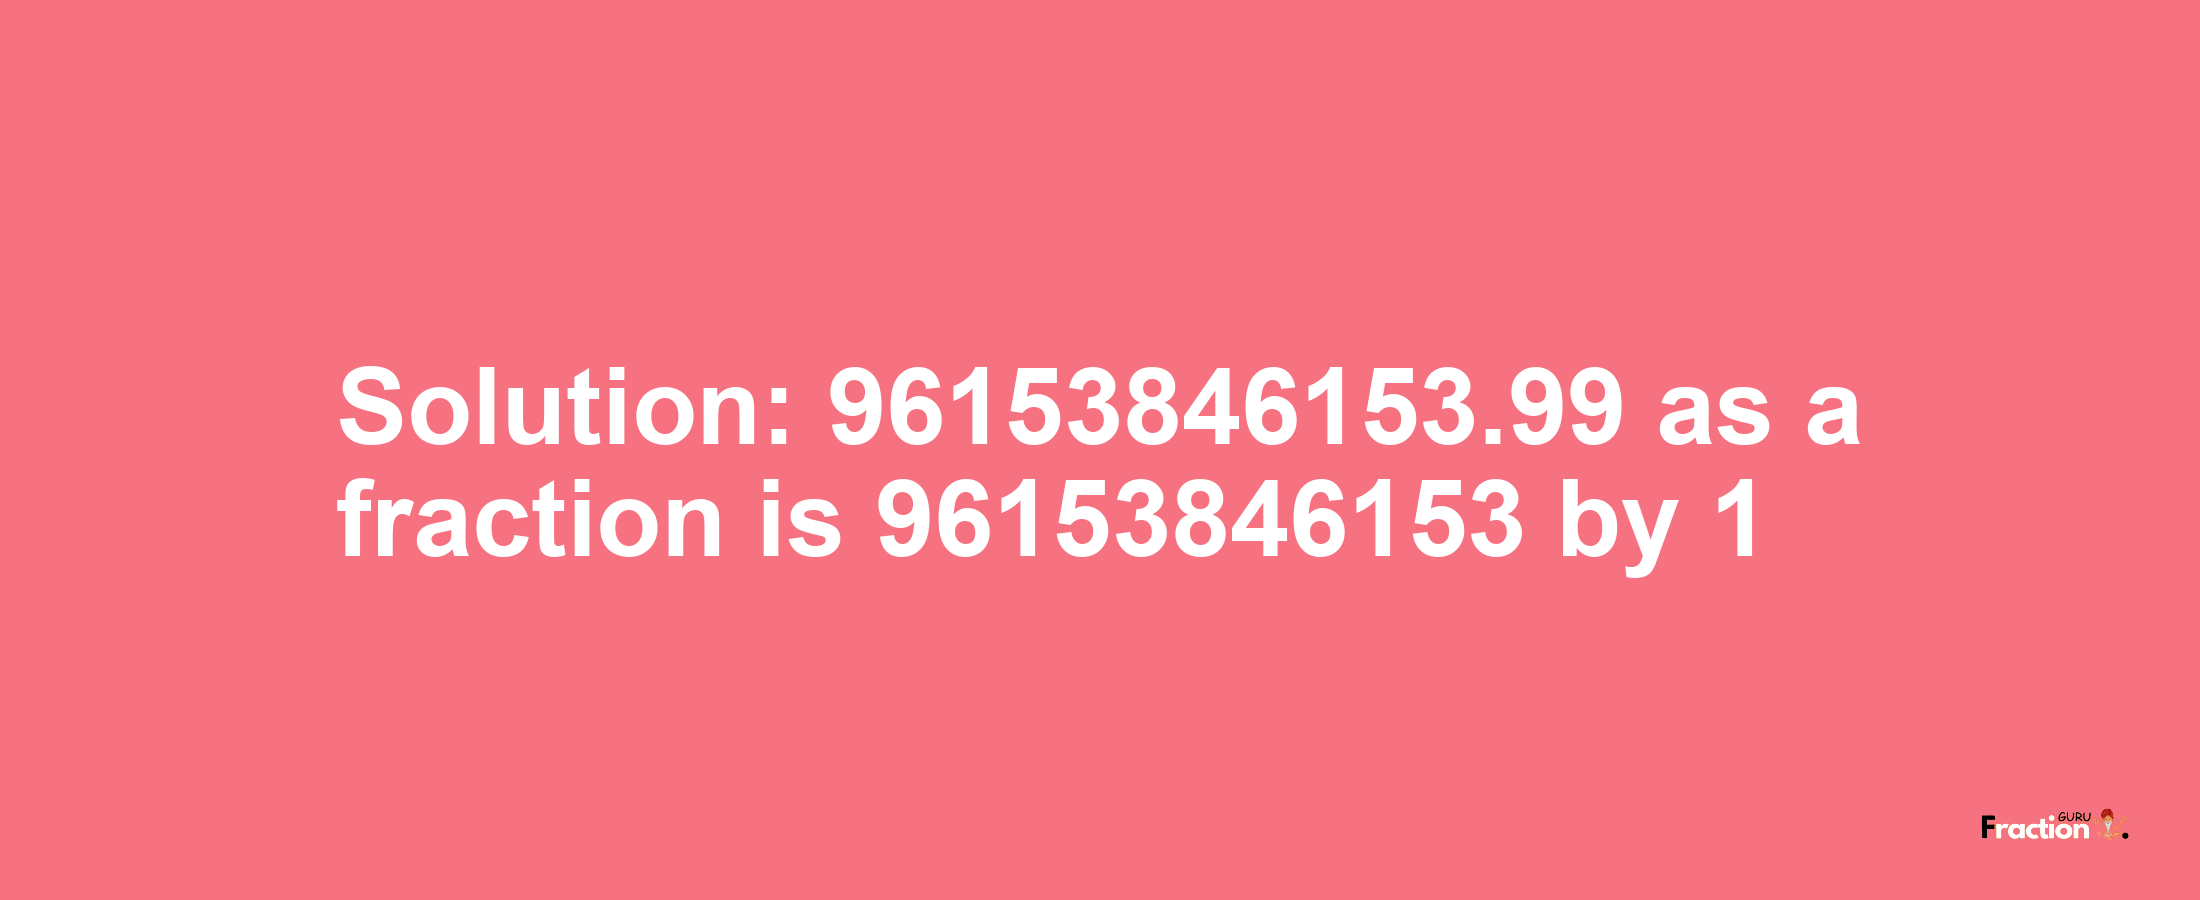 Solution:96153846153.99 as a fraction is 96153846153/1